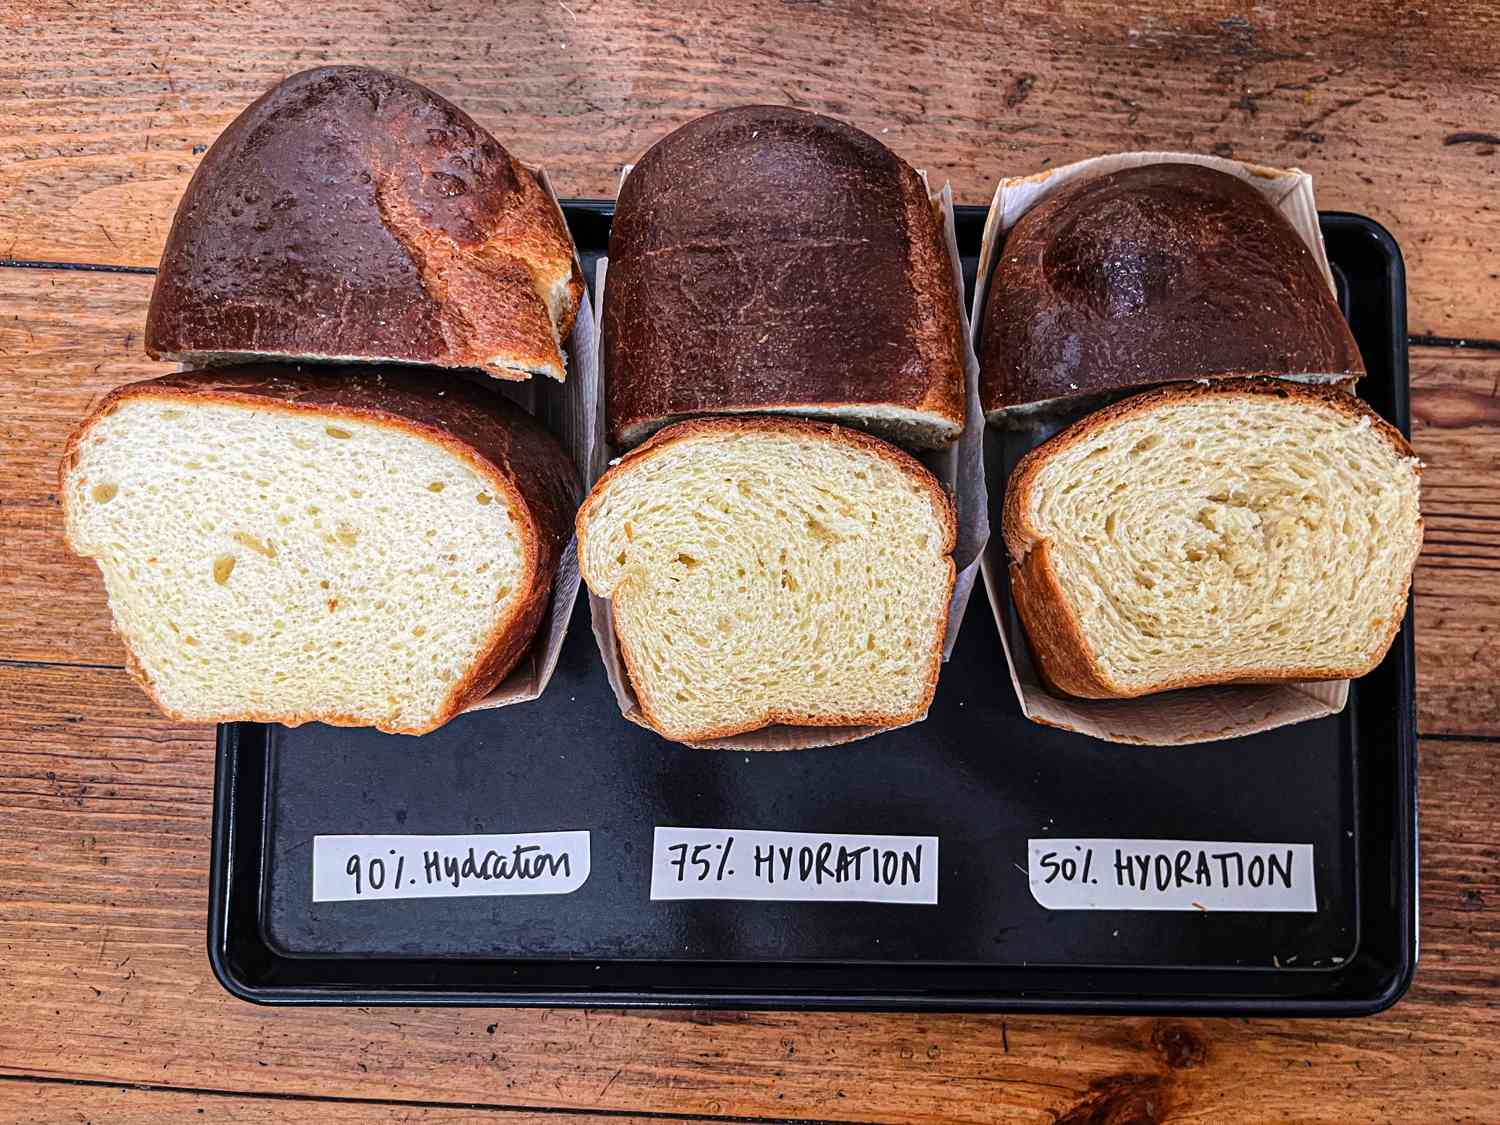 Three brioche loaves cut in half to show the difference between 90% hydration, 75% hydration, and 50% hydration